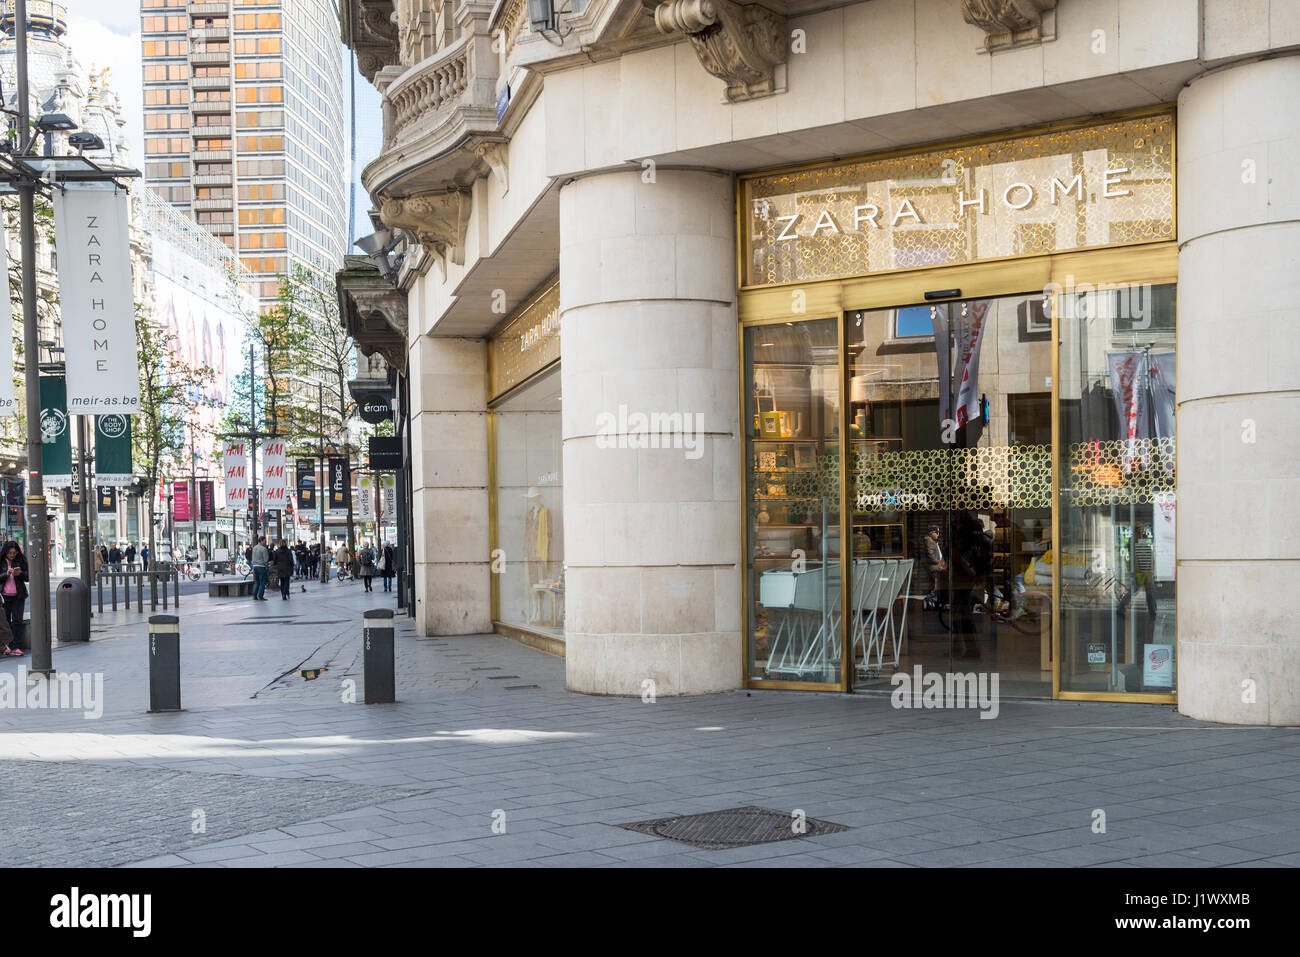 Zara Home store at the Meir in Antwerp Stock Photo - Alamy